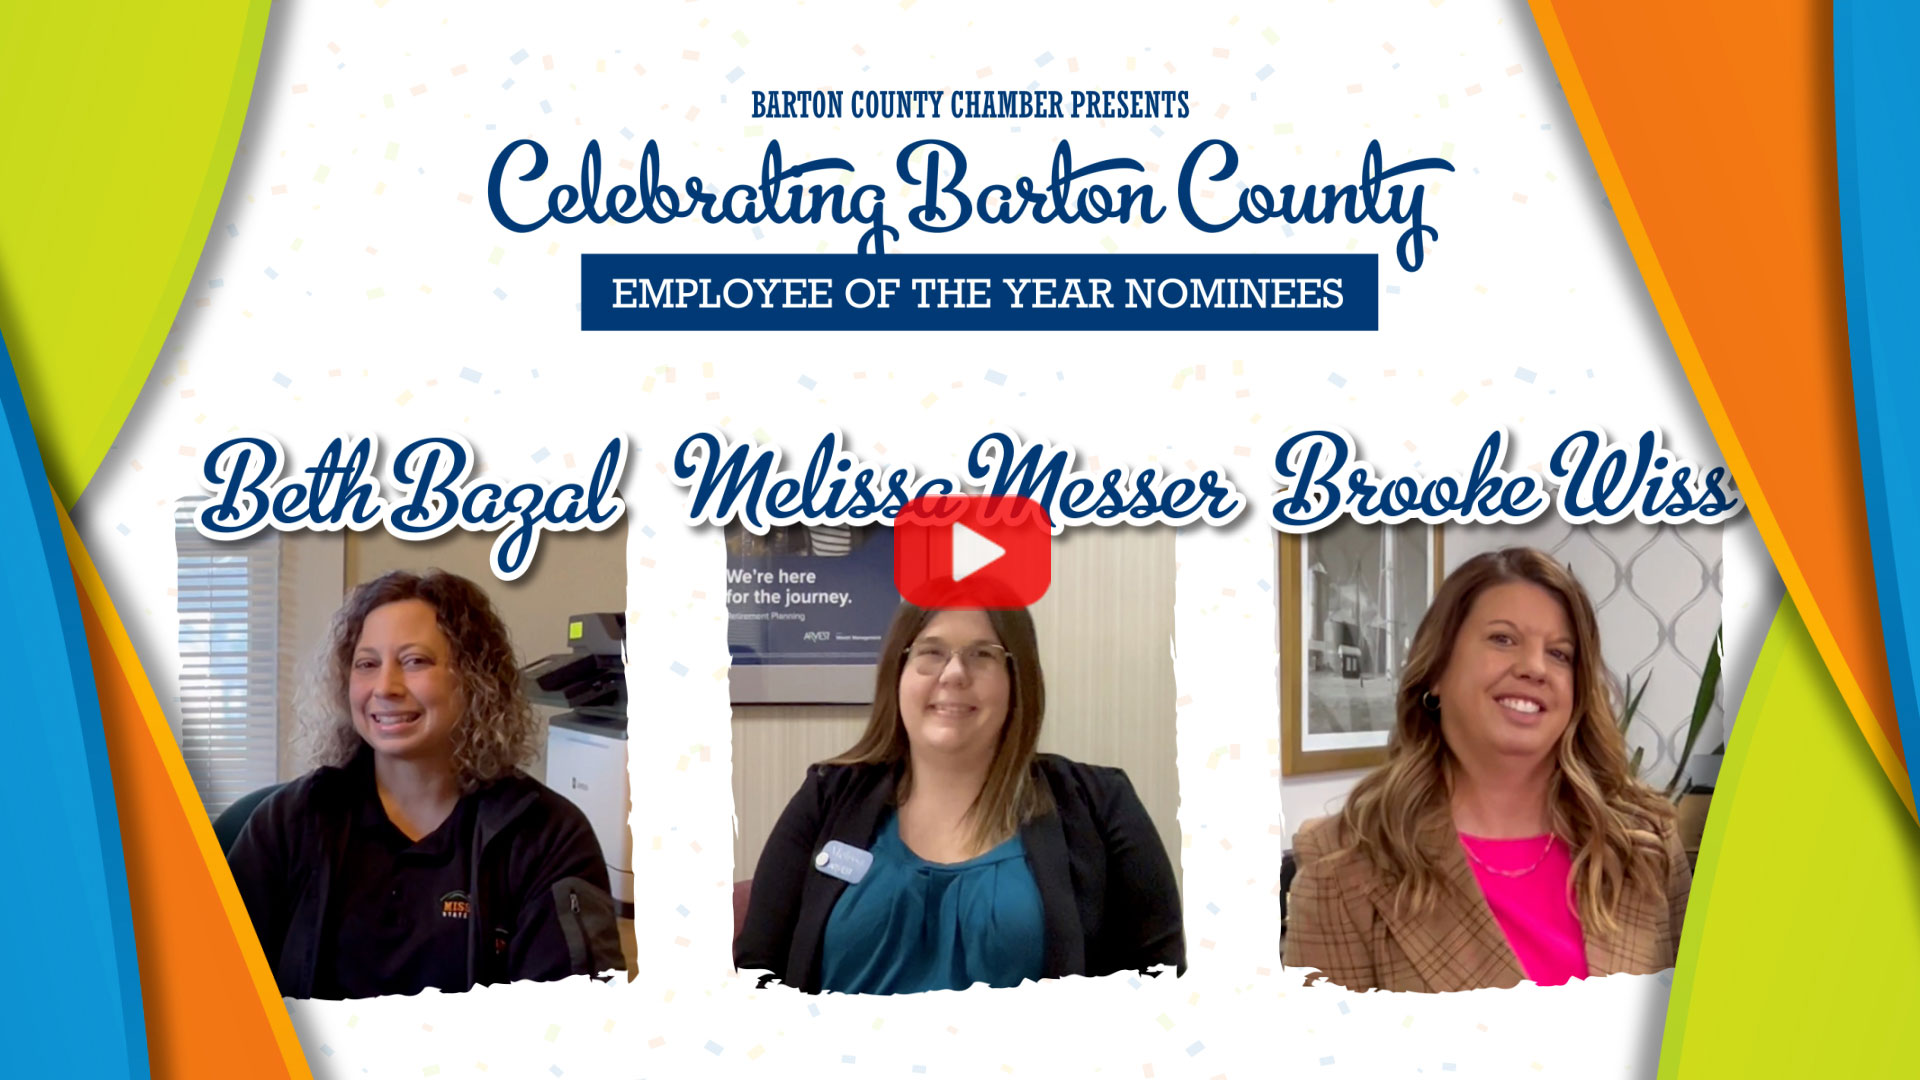 Barton County Chamber of Commerce Best of Community Award Nominees Employee